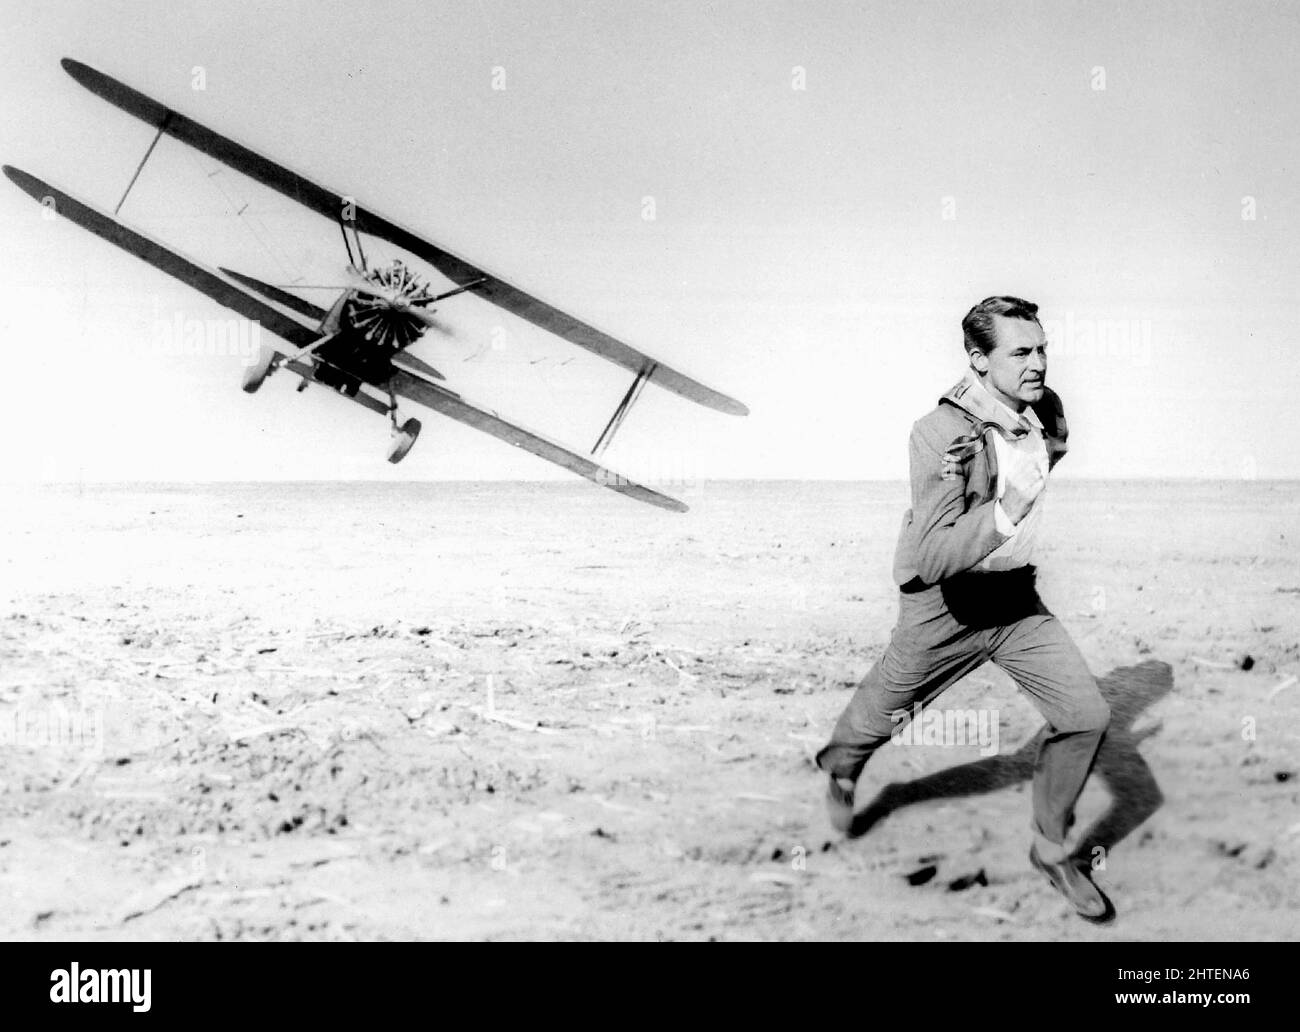 Cary Grant - Iconic scene from North by Northwest - Airplane chase - 1959 Stock Photo